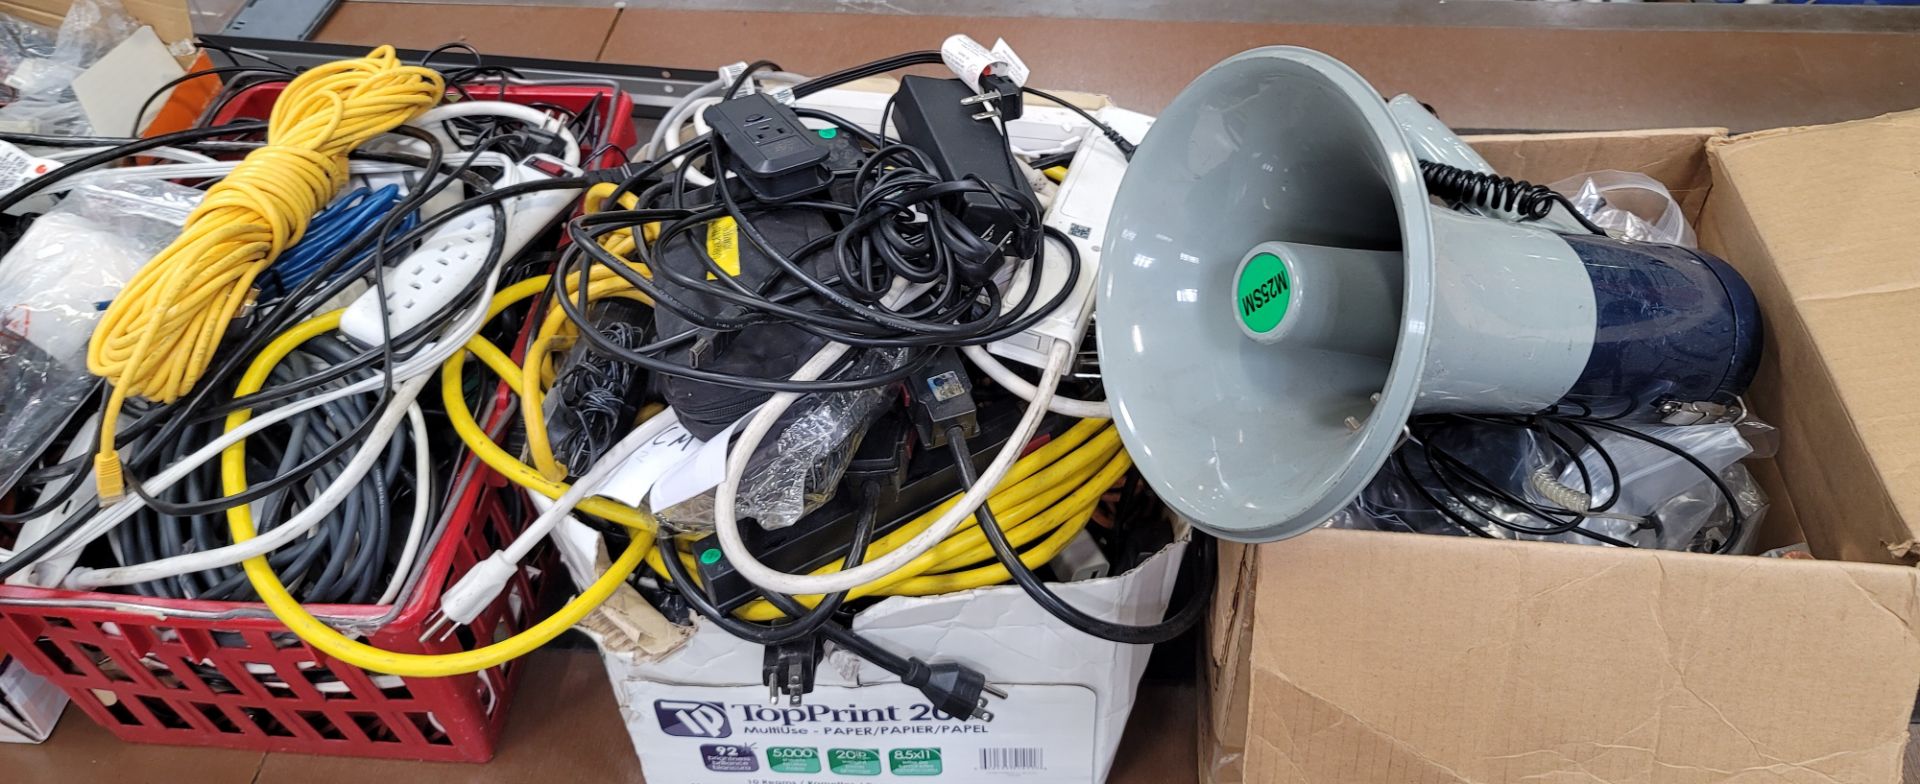 LOT - LARGE COLLECTION OF ELECTRONIC WIRE, CORDS, CHARGERS, ETC. - Image 2 of 5